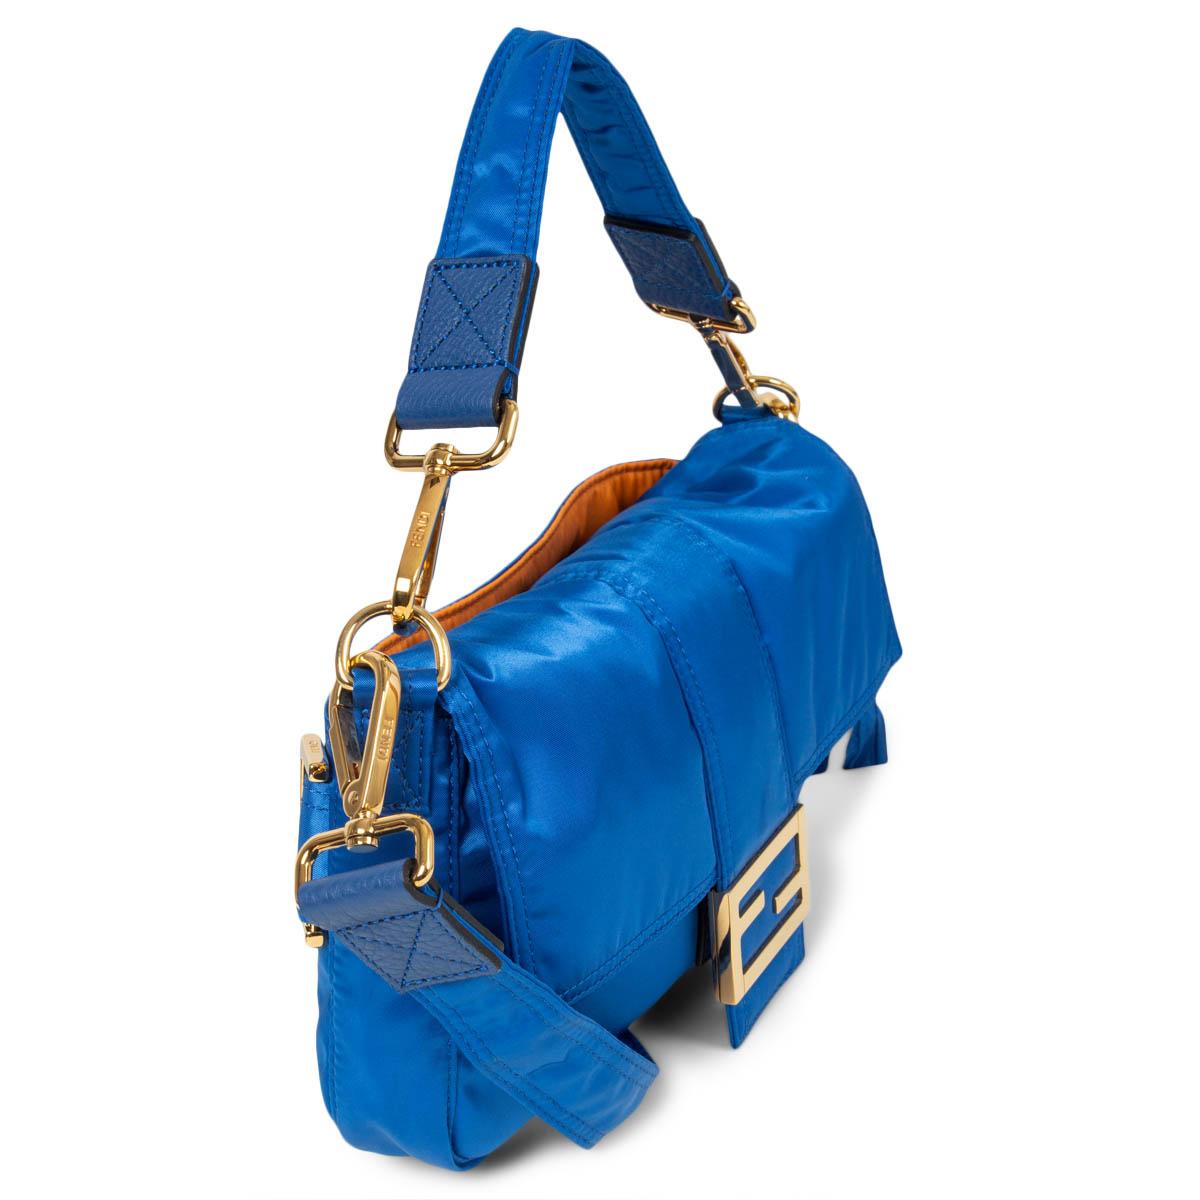 100% authentic Fendi x Porter Baguette Bag Capsule Collection in electric blue nylon featuring gold-tone hardware and leather details. Opens with a magnetic button under the flap and is lined in blue nylon with a zipper pocket against the back. The